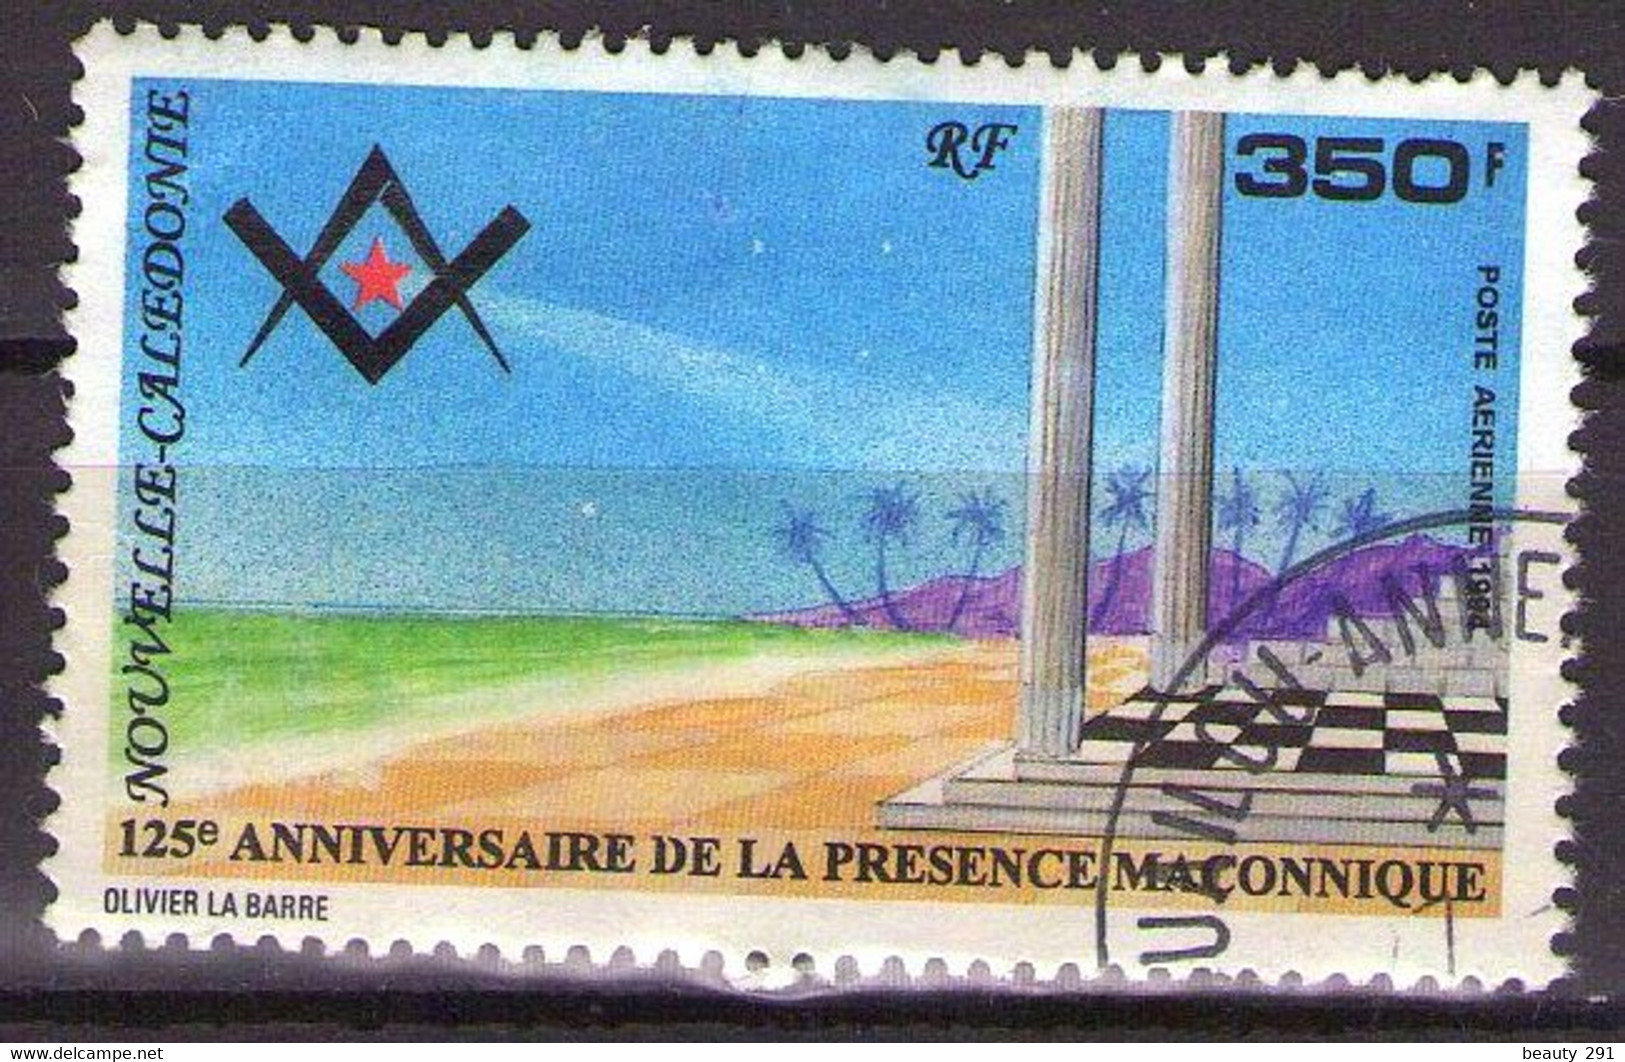 NOUVELLE CALEDONIE - POSTE AERIENNE  1994  Mi 1023   USED - Used Stamps